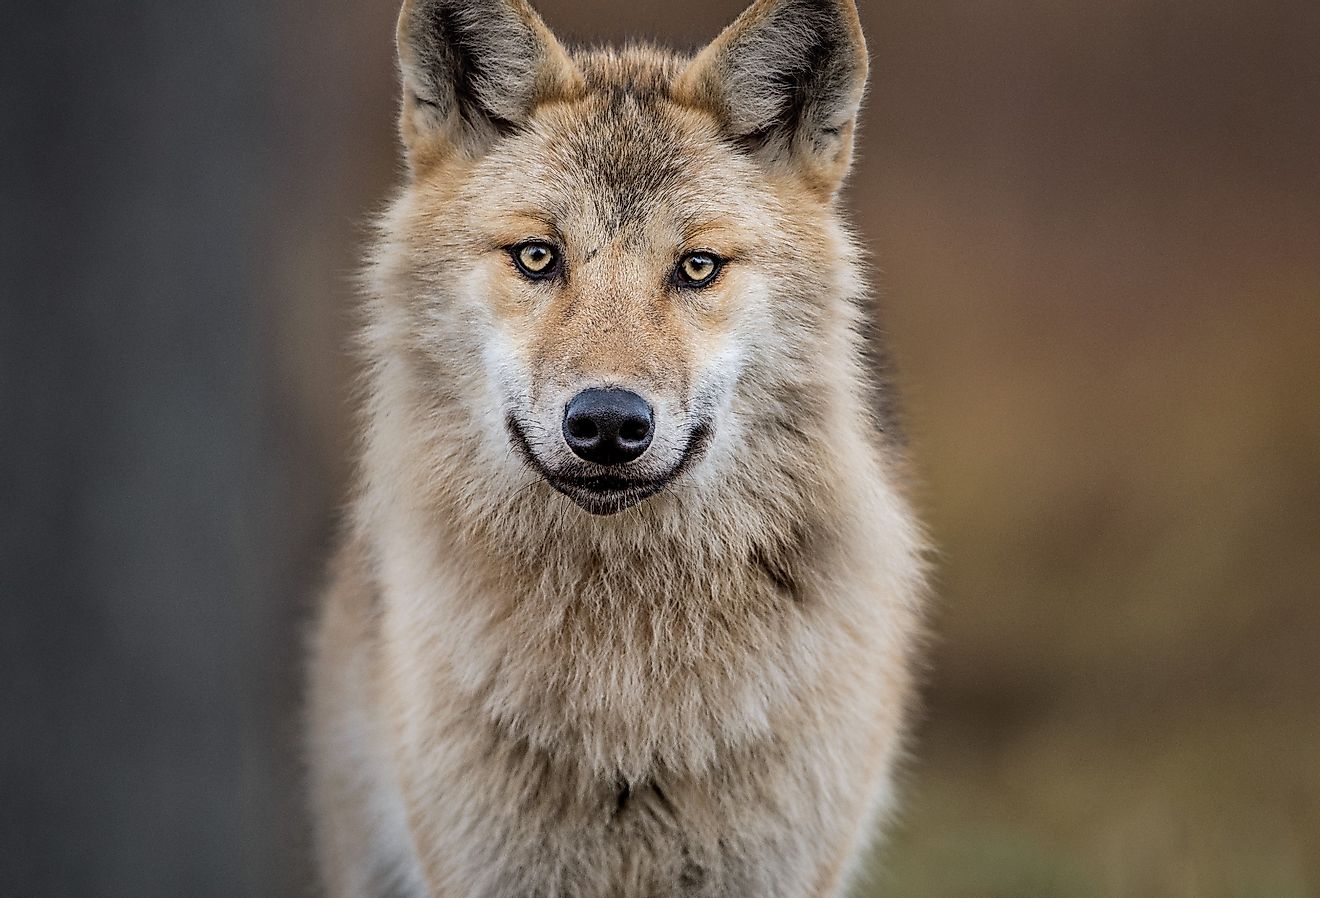 The Eurasian wolf is a symbol of pride in Georgia and their unofficial national animal.